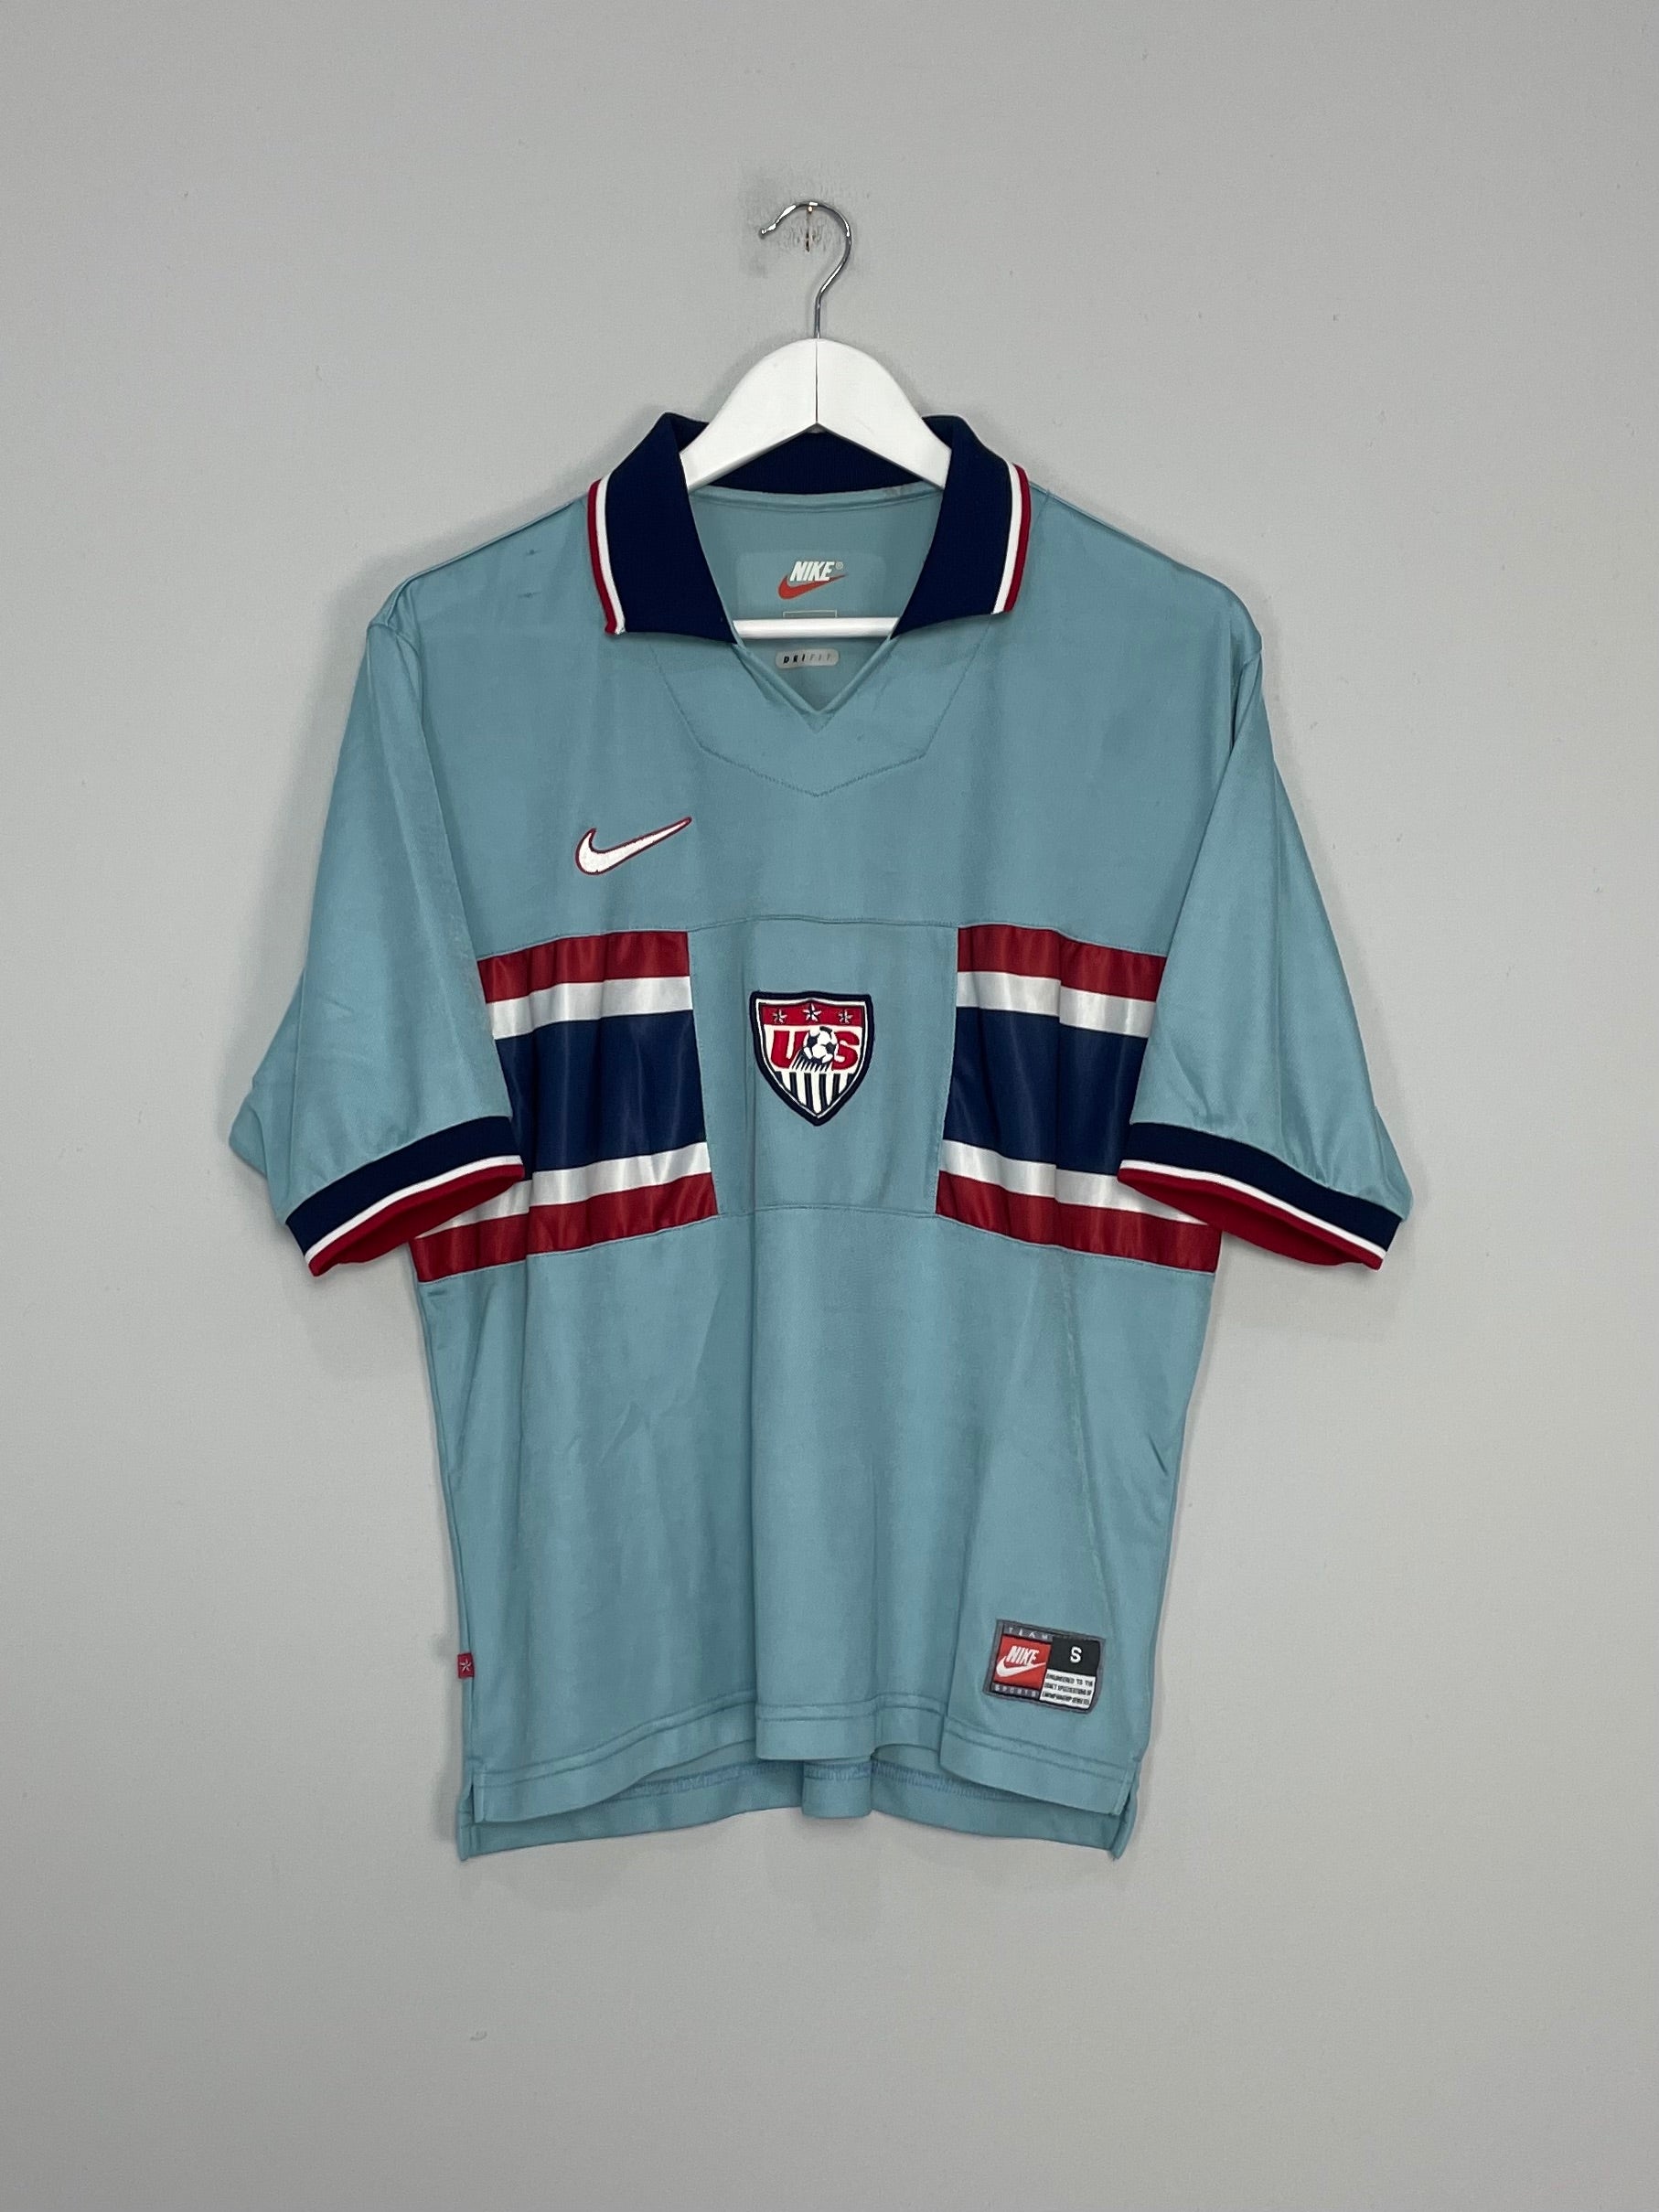 2002 Nike Red/White/Blue Team USA XXL Jersey - clothing